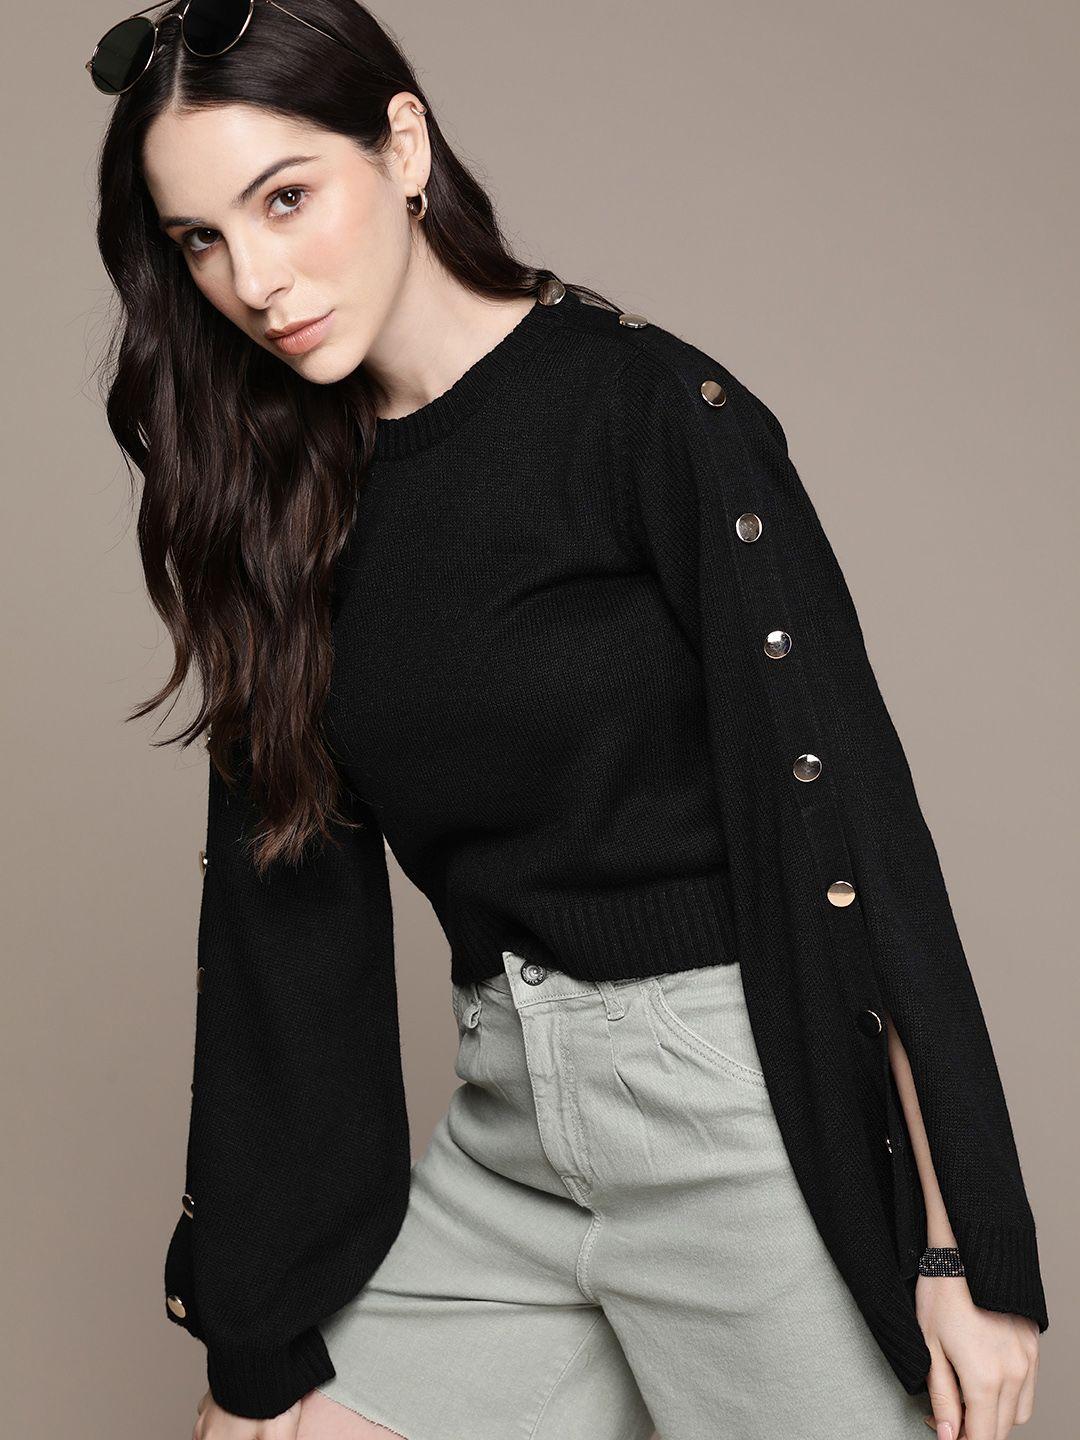 the-roadster-lifestyle-co.-long-flared-slit-sleeves-button-detail-pullover